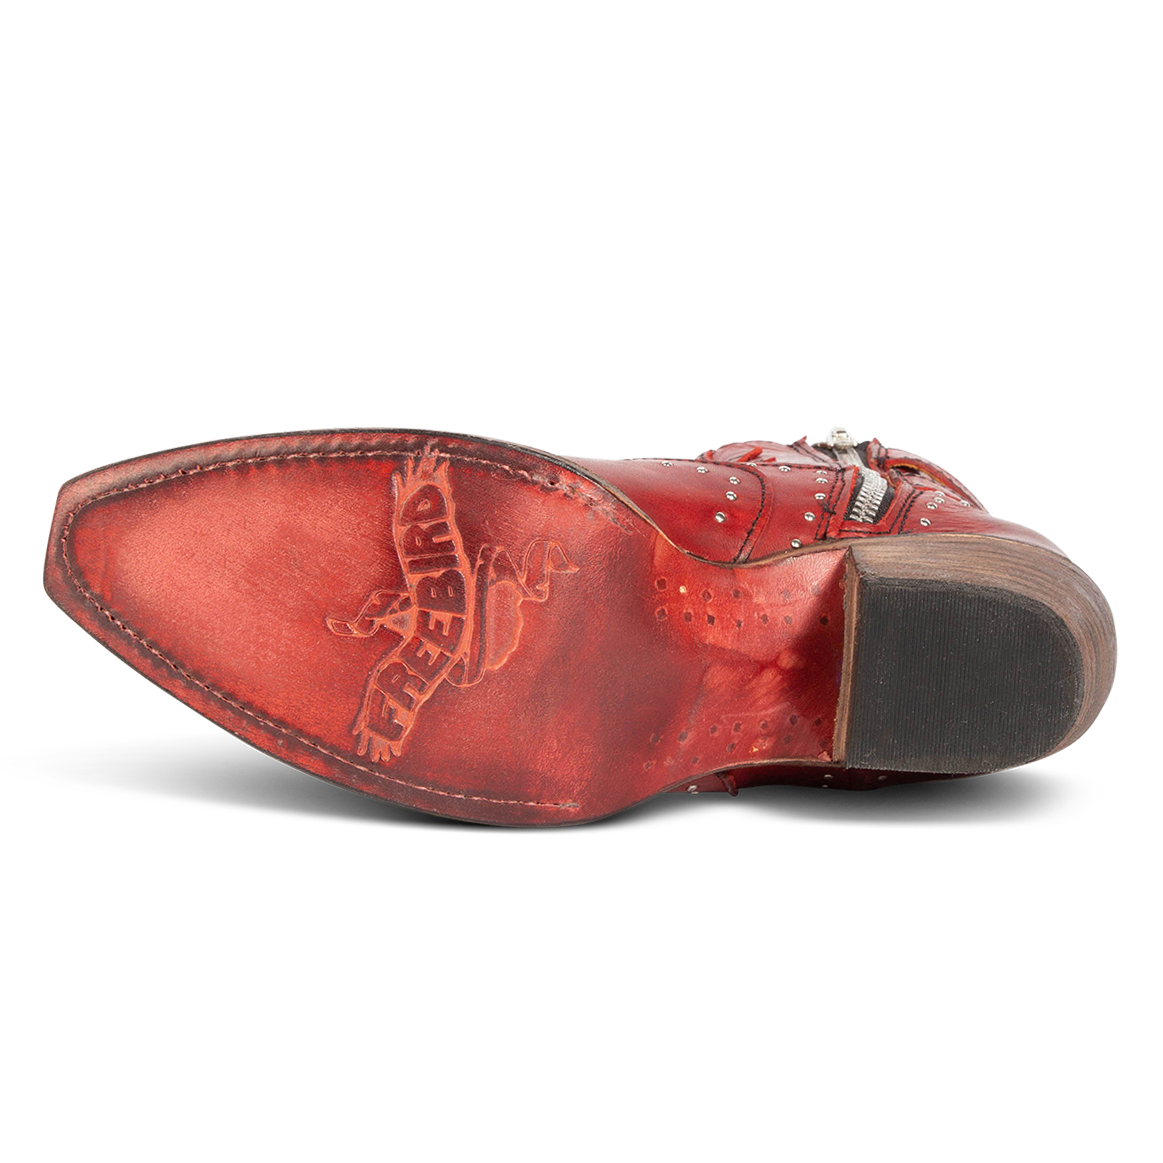 Leather sole imprinted with FREEBIRD on women's Morgan red leather ankle bootie